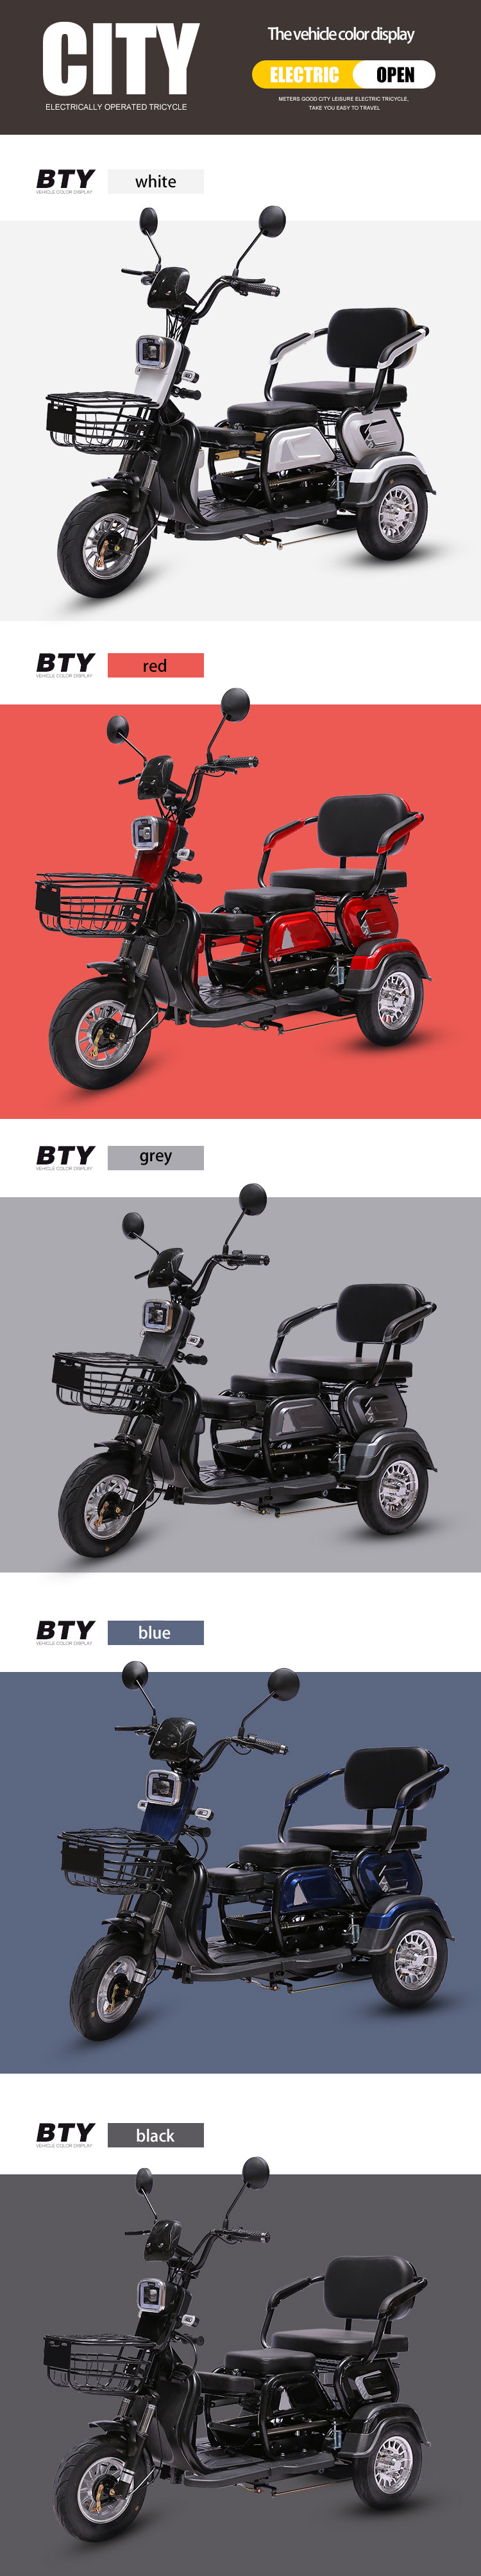 slingshot motorcycles tricycles for sale 3 wheel folding outdoor mobility scooter electric wheelchair price motorcycle tricycle